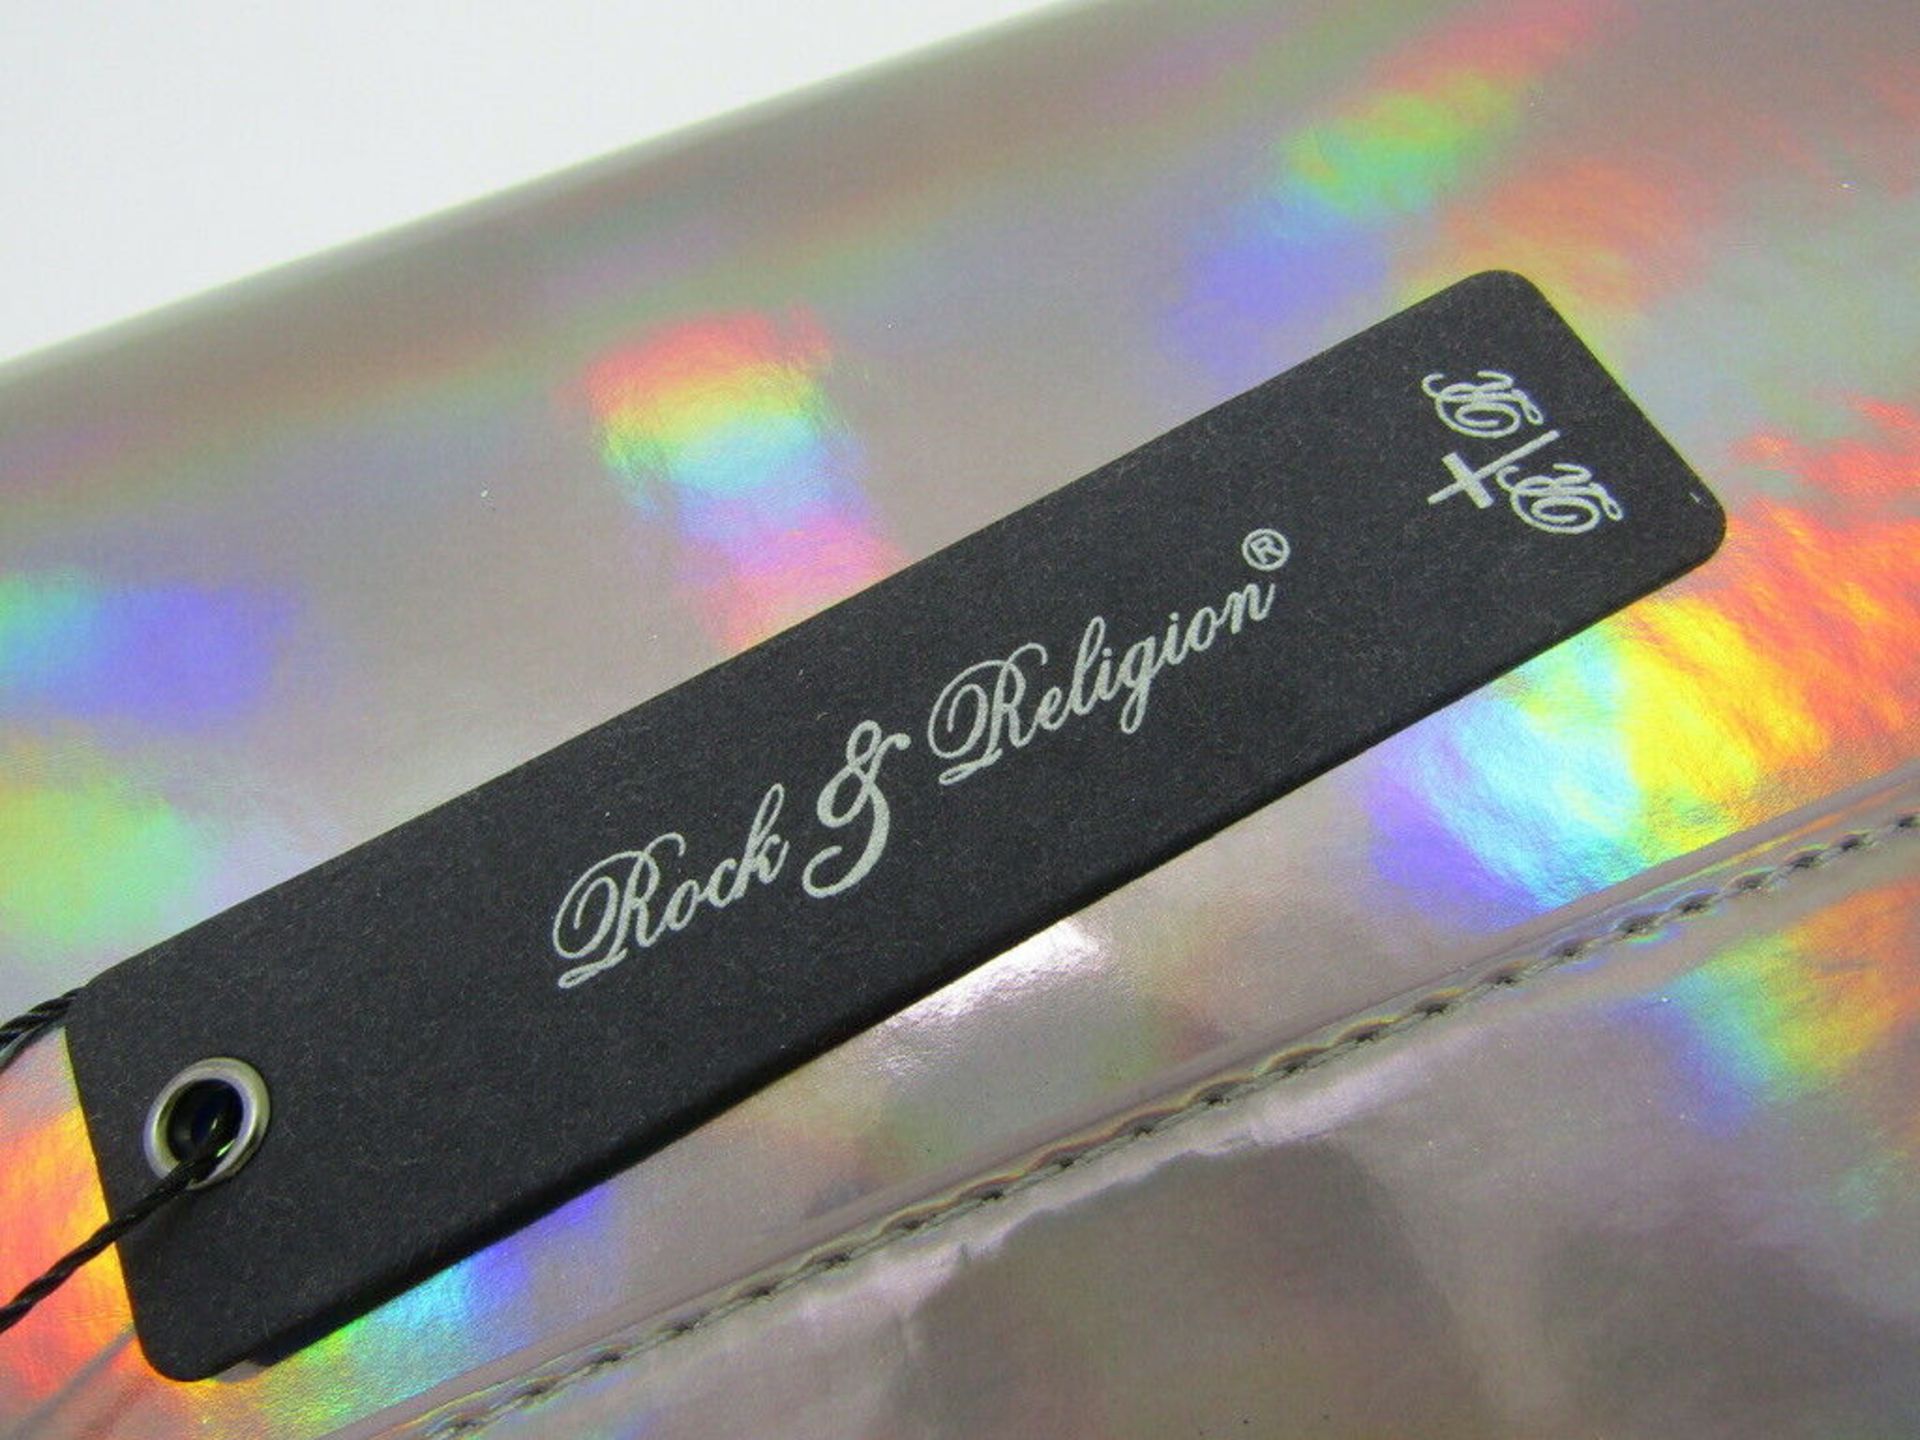 10 x Clutch Bag. Pearlescent. Metalic. Hand Bag by Rock & Religion. no vat on hammer.You will get 10 - Image 4 of 5